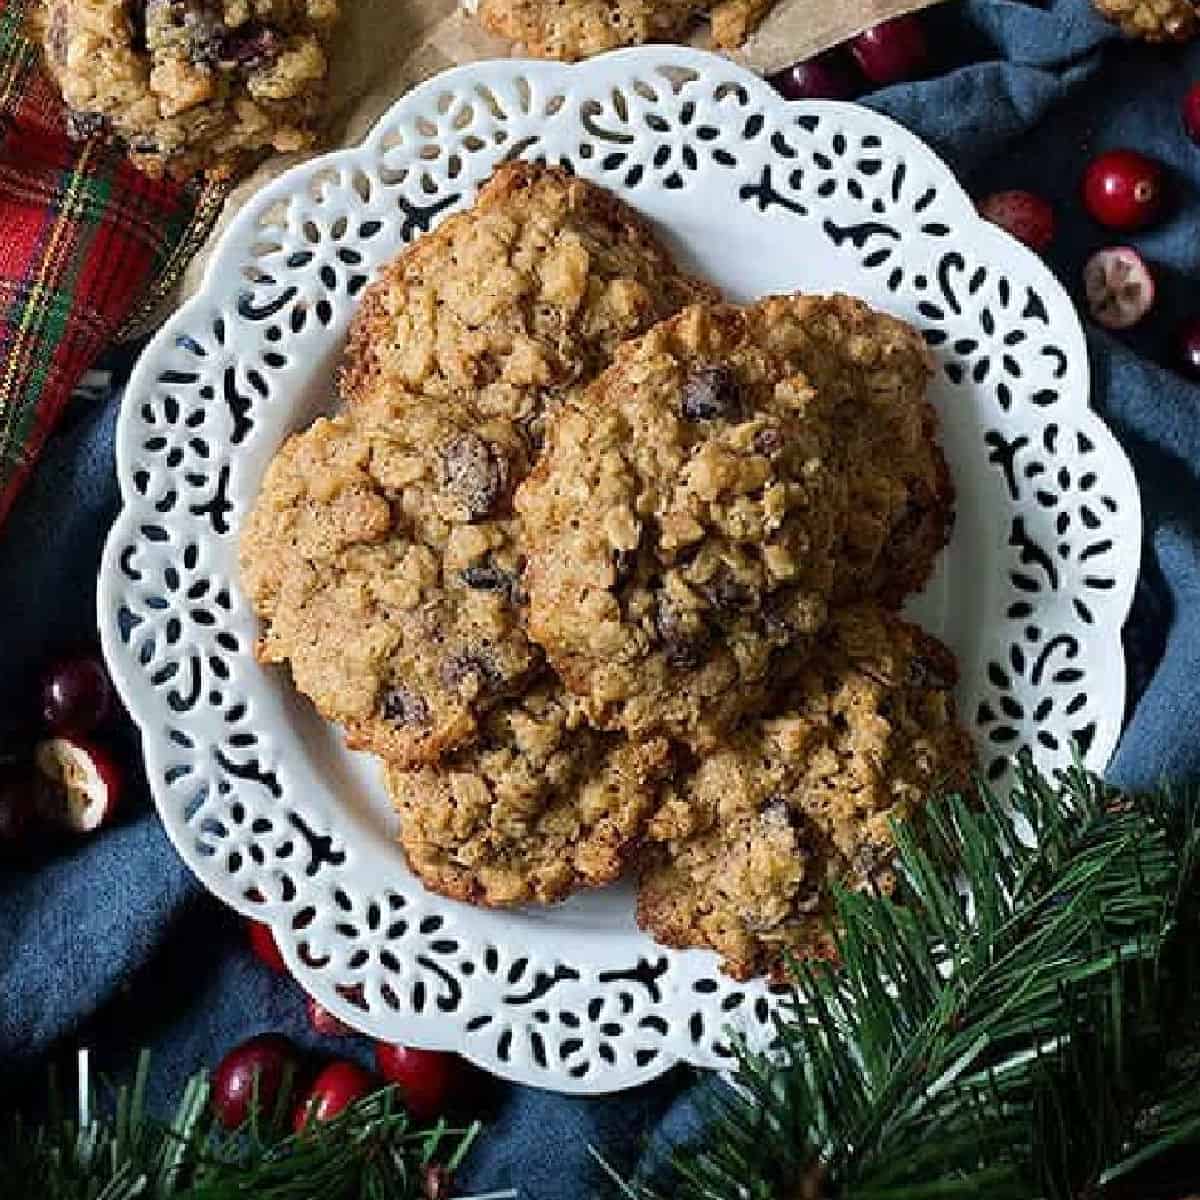 These are the best cranberry oatmeal cookies ever! Crispy on the edges and chewy on the inside, these delicious walnuts oatmeal cranberry cookies are everyone's favorite! 
